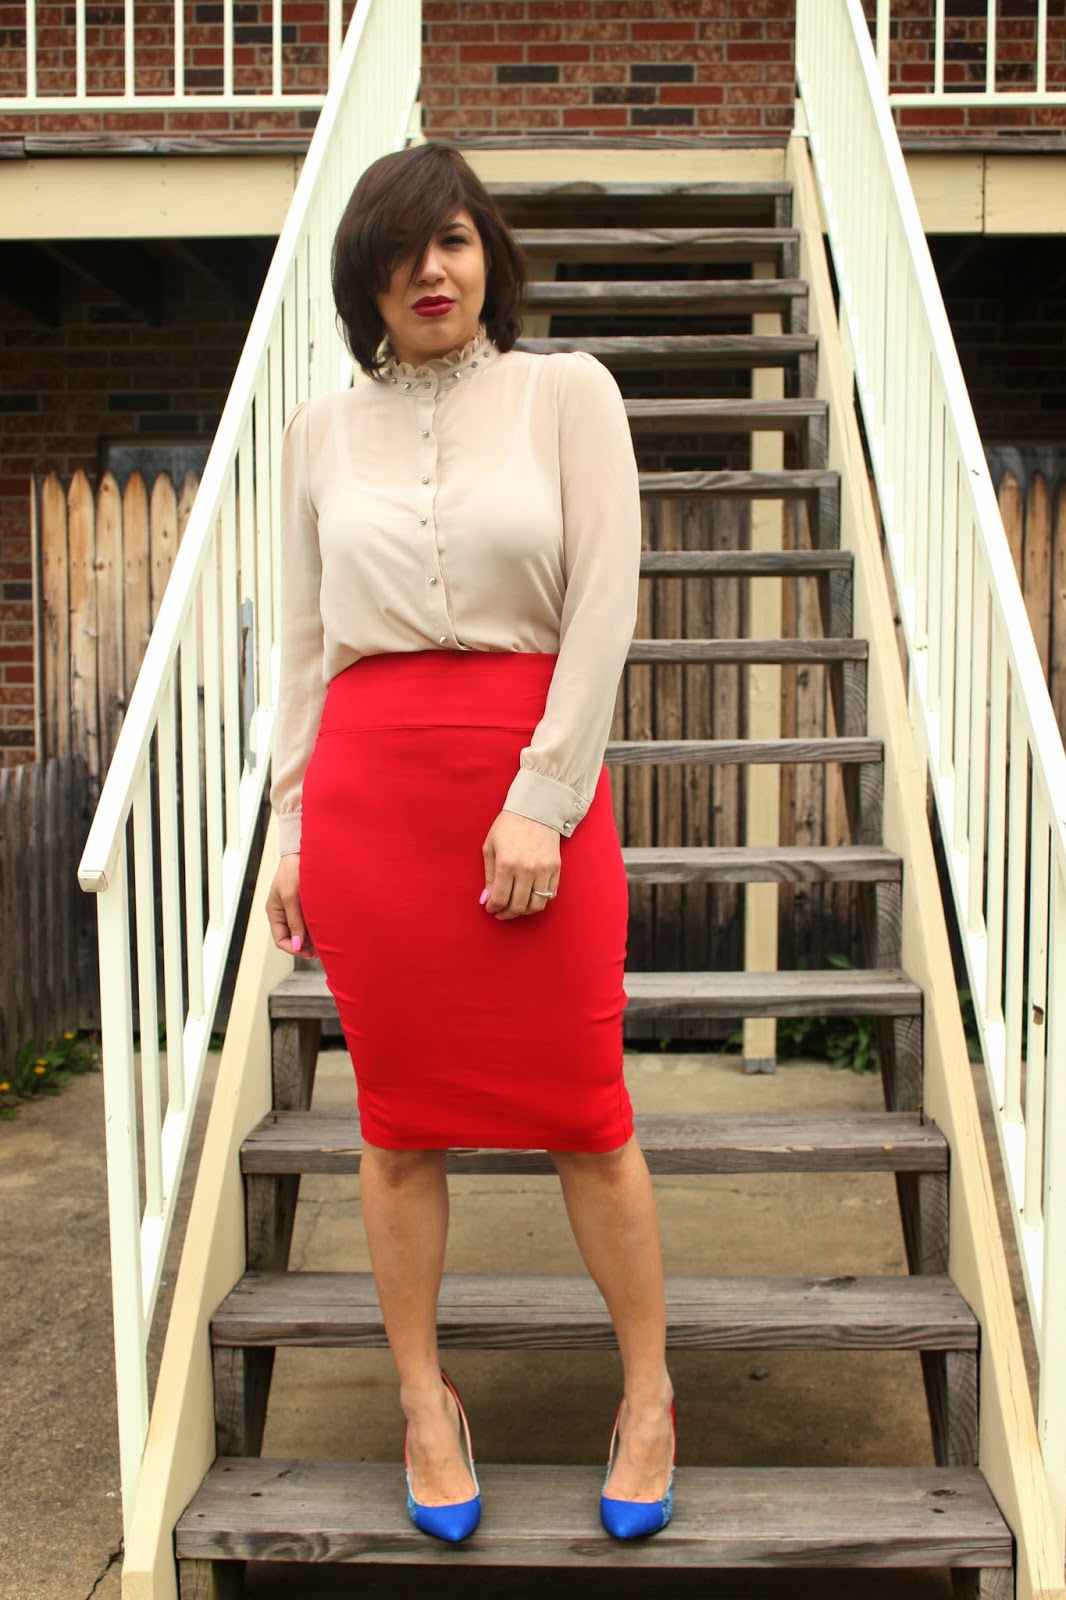 //The Red Skirt// | Diarychic